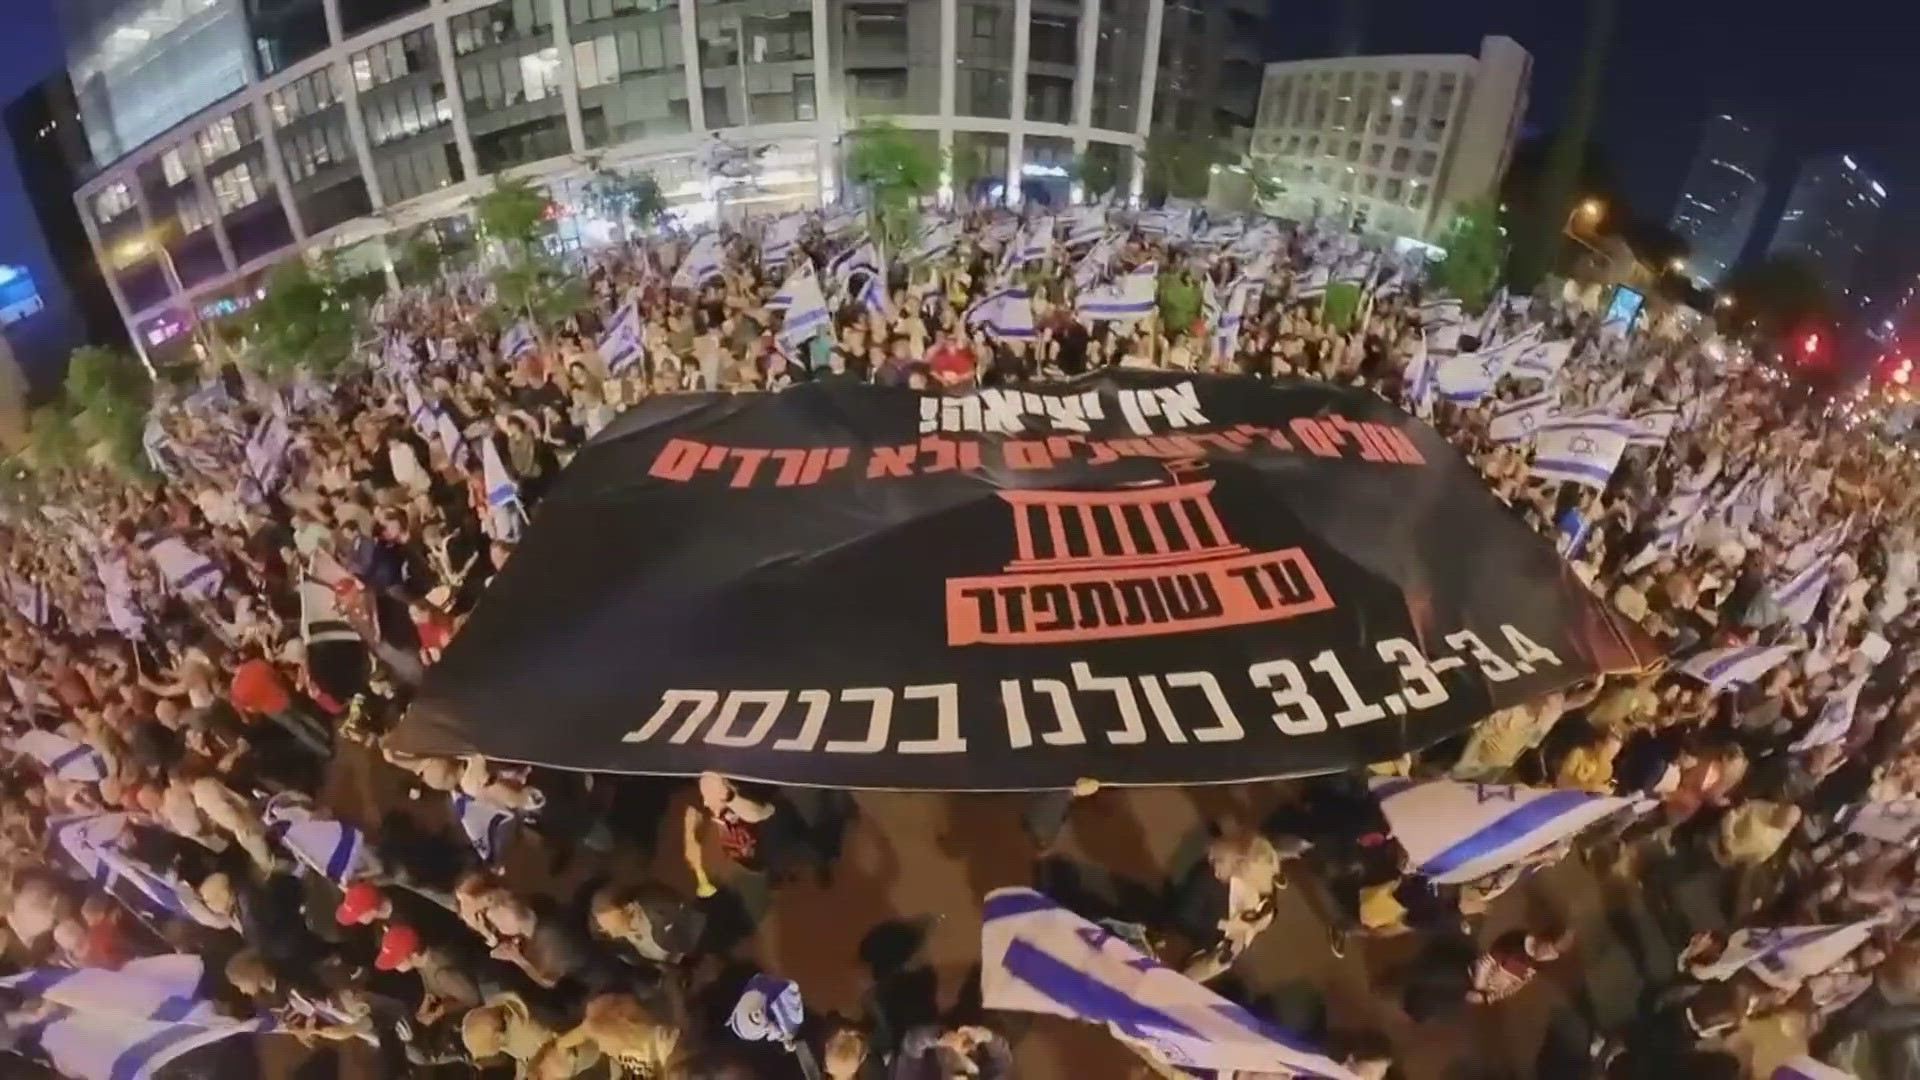 Video shows protestor chanting in Hebrew: "We will not give up until things get better."